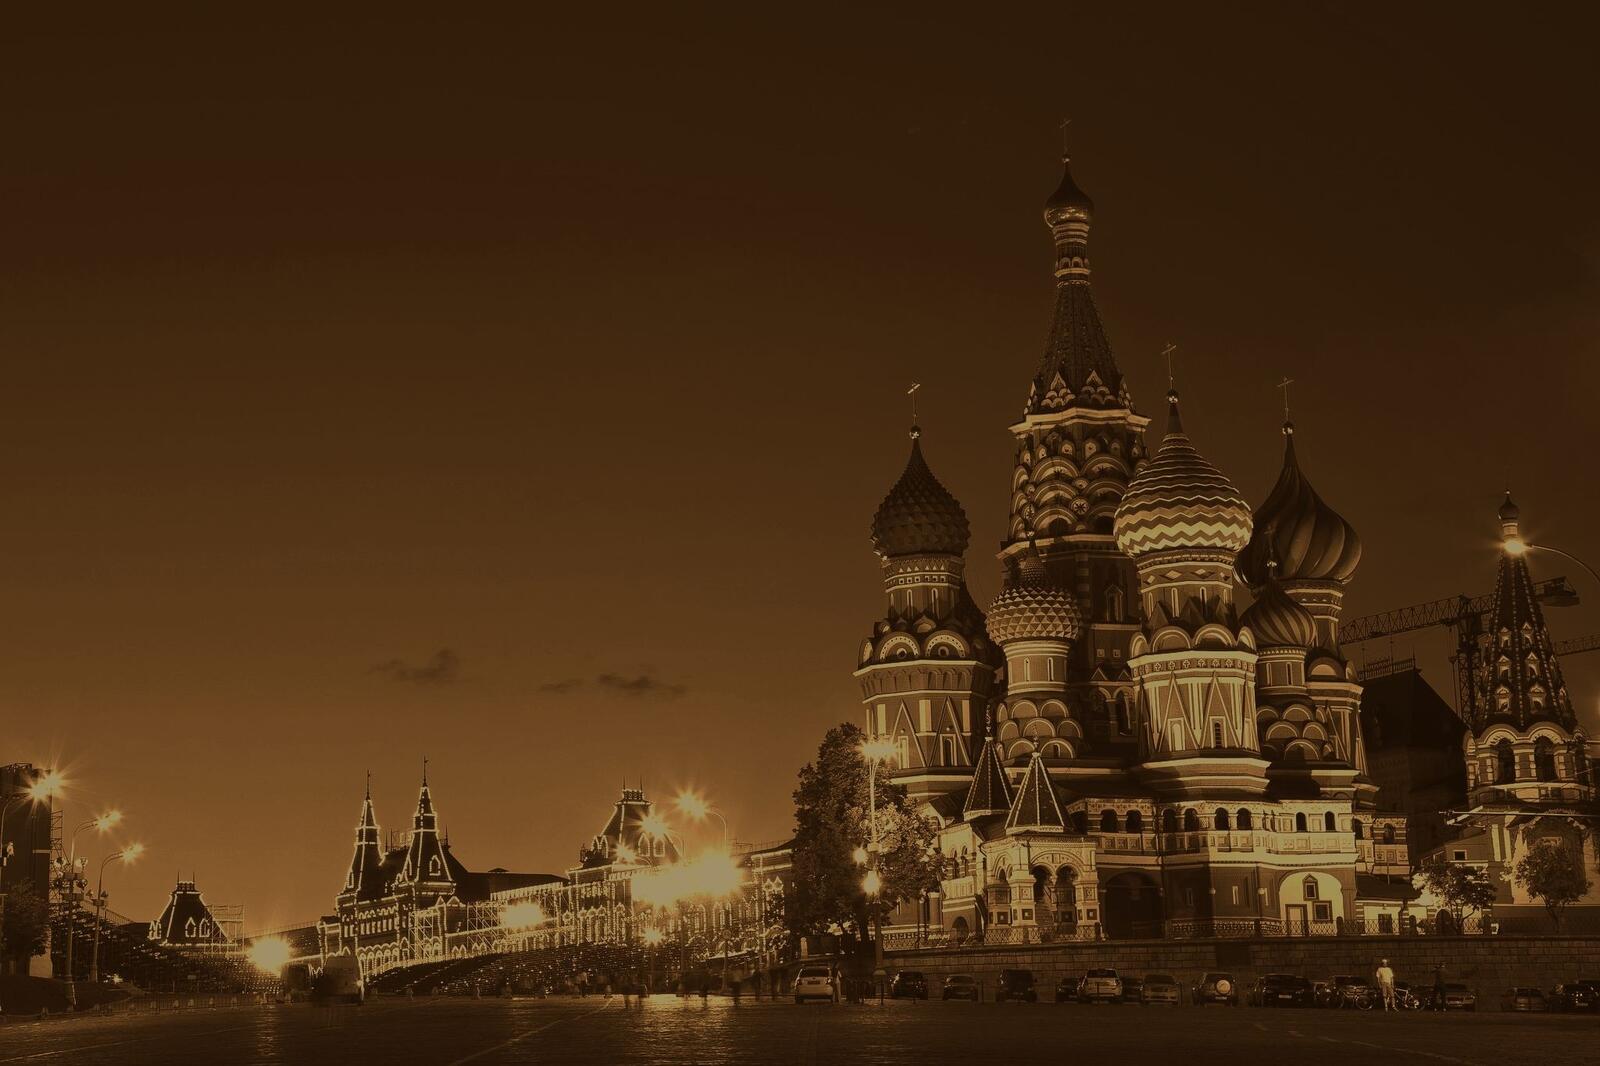 Wallpapers wallpaper russia Moscow saint basil on the desktop